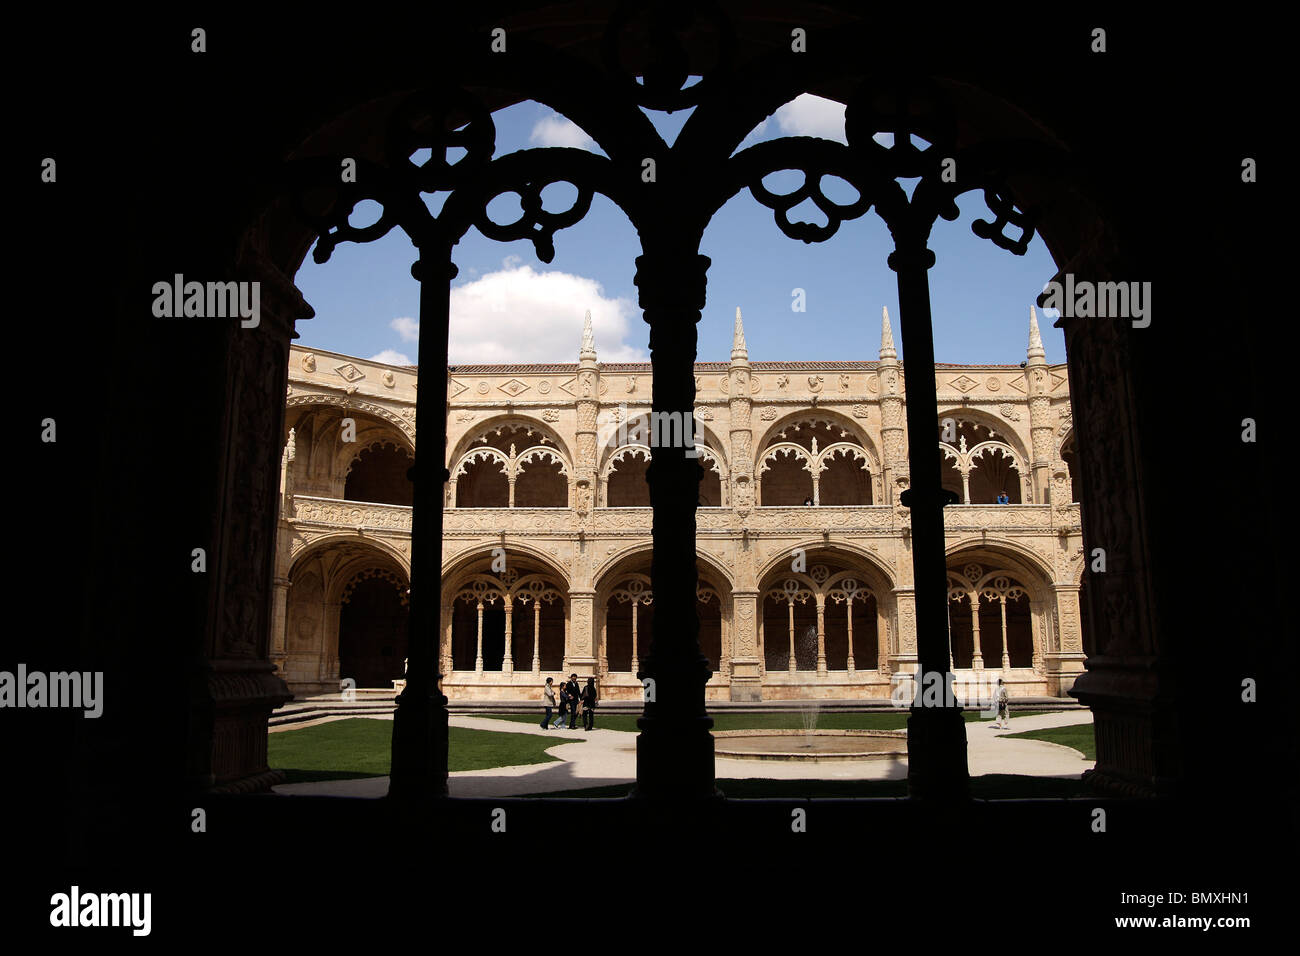 Decorated cloister arches at Jeronimos Monastery Mosteiro dos Jerominos in Belem, Lisbon, Portugal, Europe Stock Photo